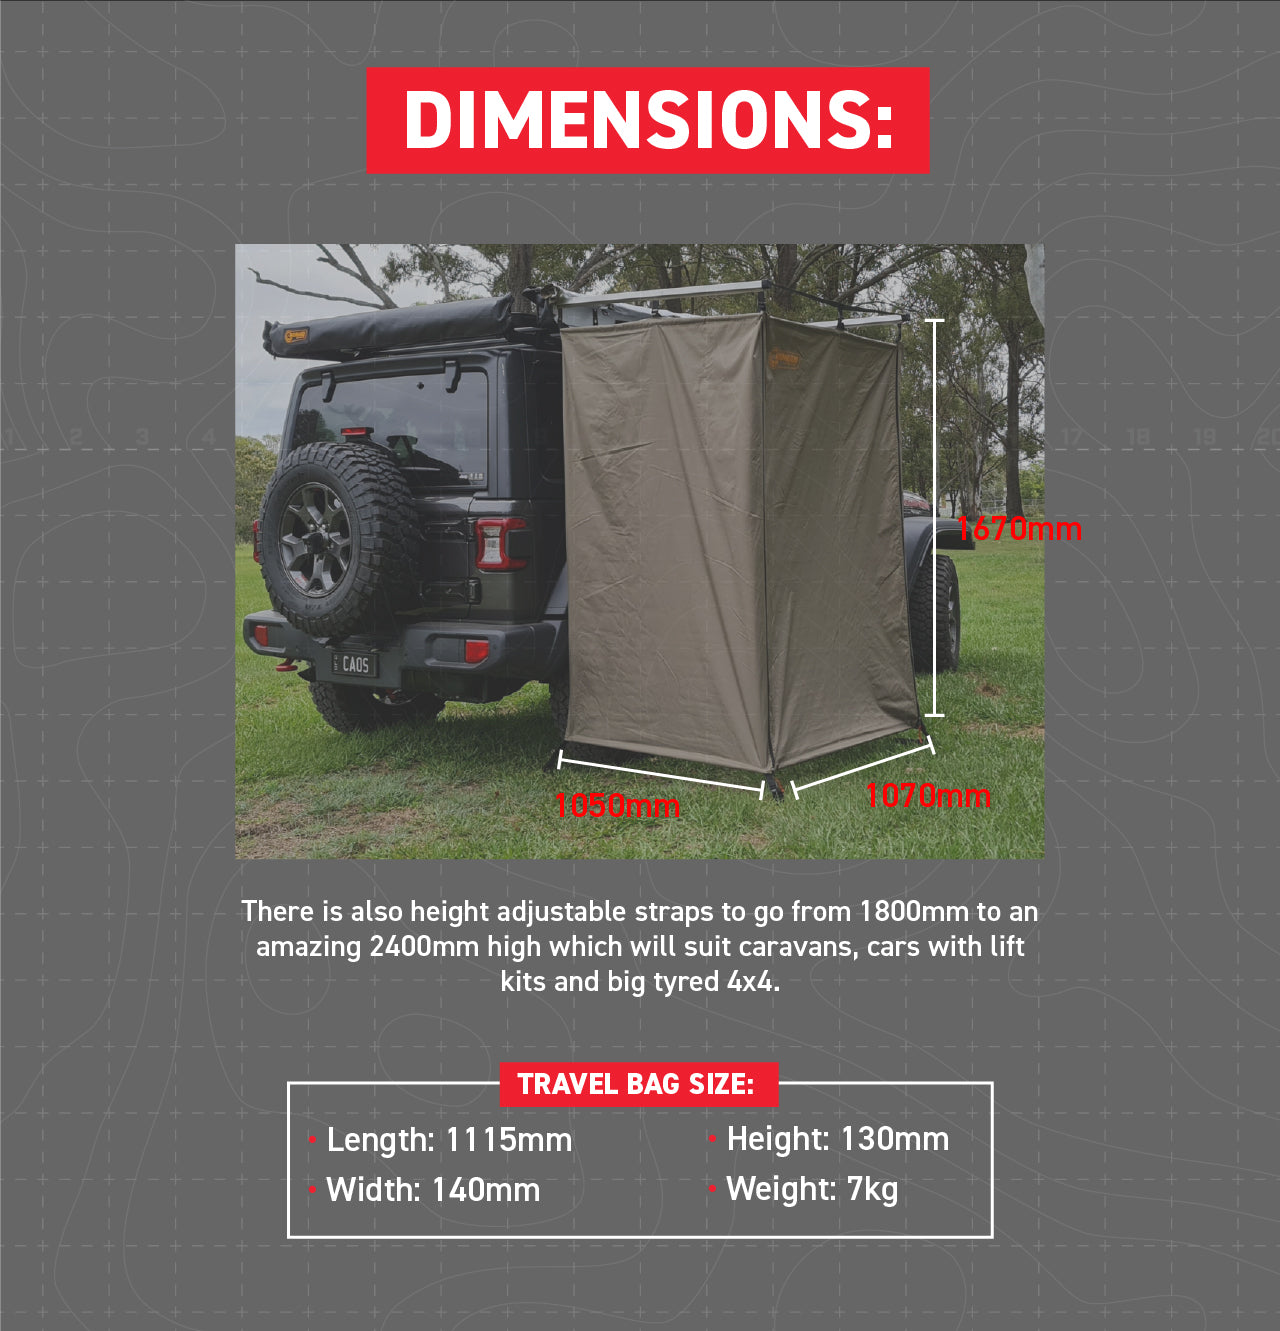 Size of Shower Awning: 1050mm Deep, 1070mm wide, 1670mm tall  There is also height adjustable straps to go from 1800mm to an amazing 2400mm high which will suit caravans, cars with lift kits and big tyred 4x4. Aluminium Backing Plate: 1100mm  Size of Travel Bag: Length 111.5cm x Height 13cm x Width14cm. Weight 7kg 